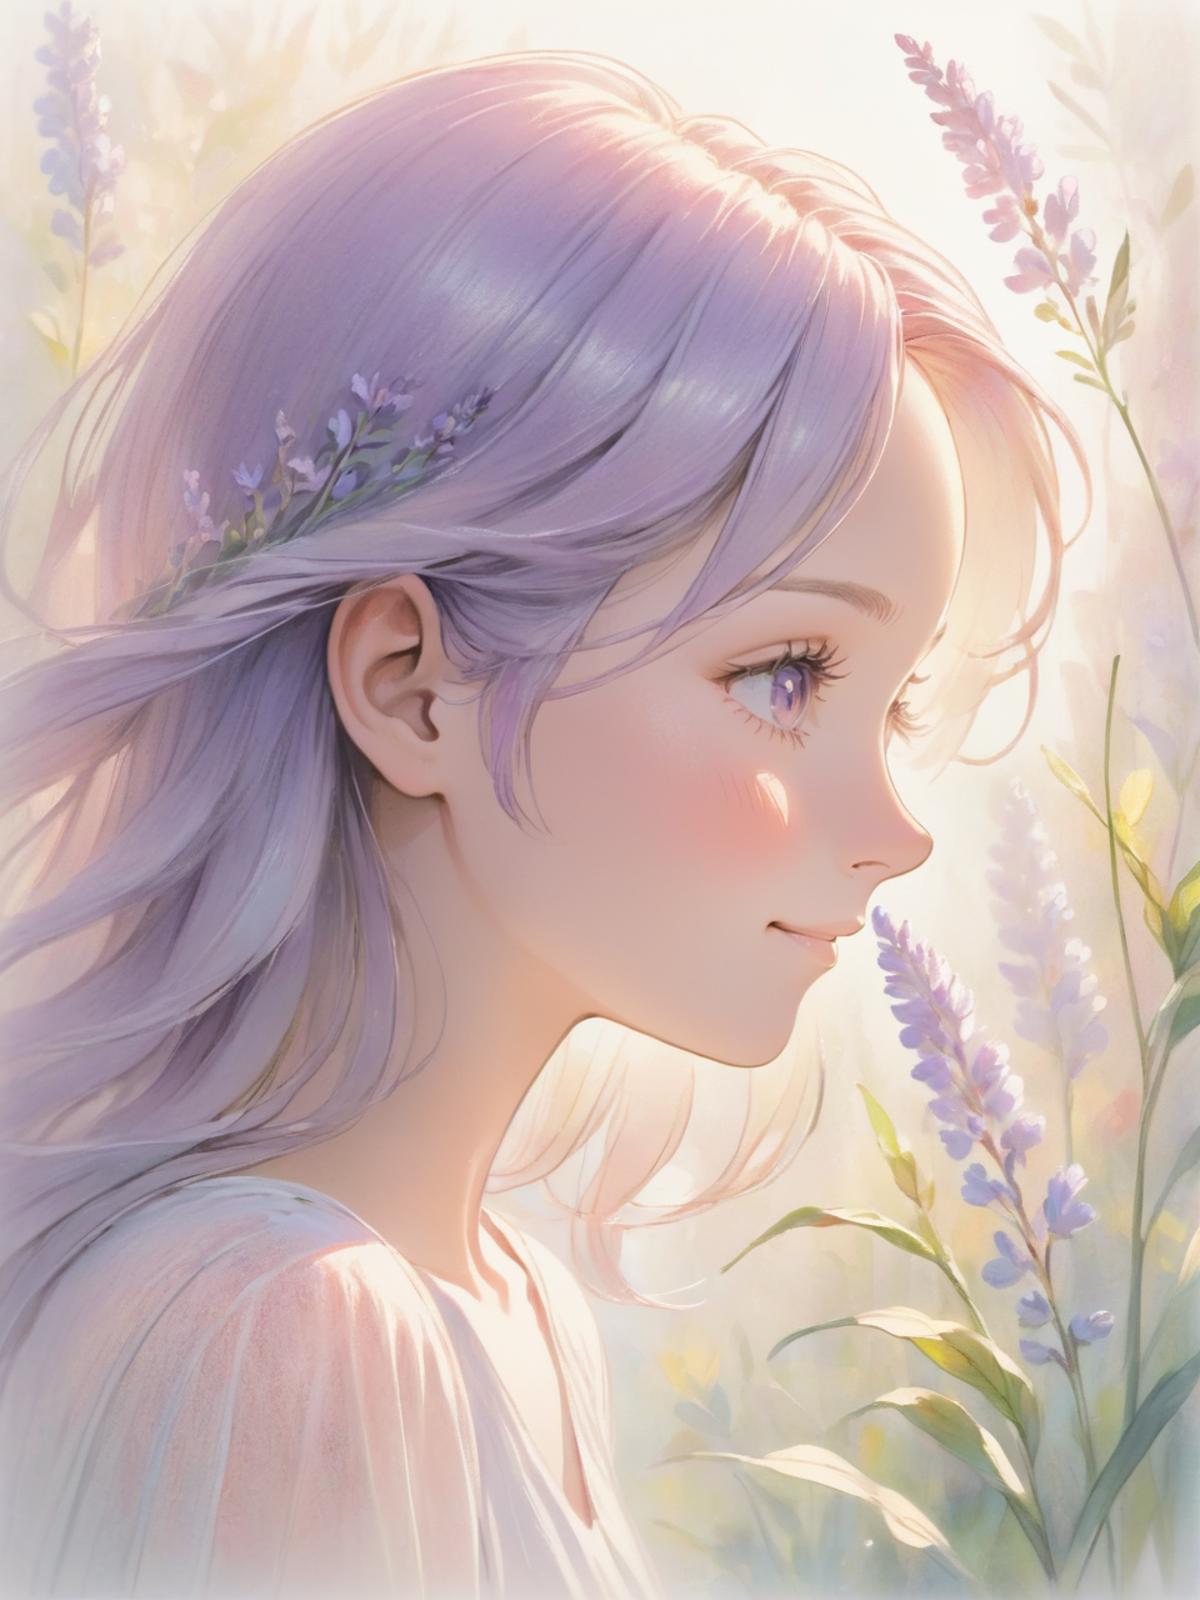 A beautiful young woman with purple hair and a pink nose, surrounded by flowers.